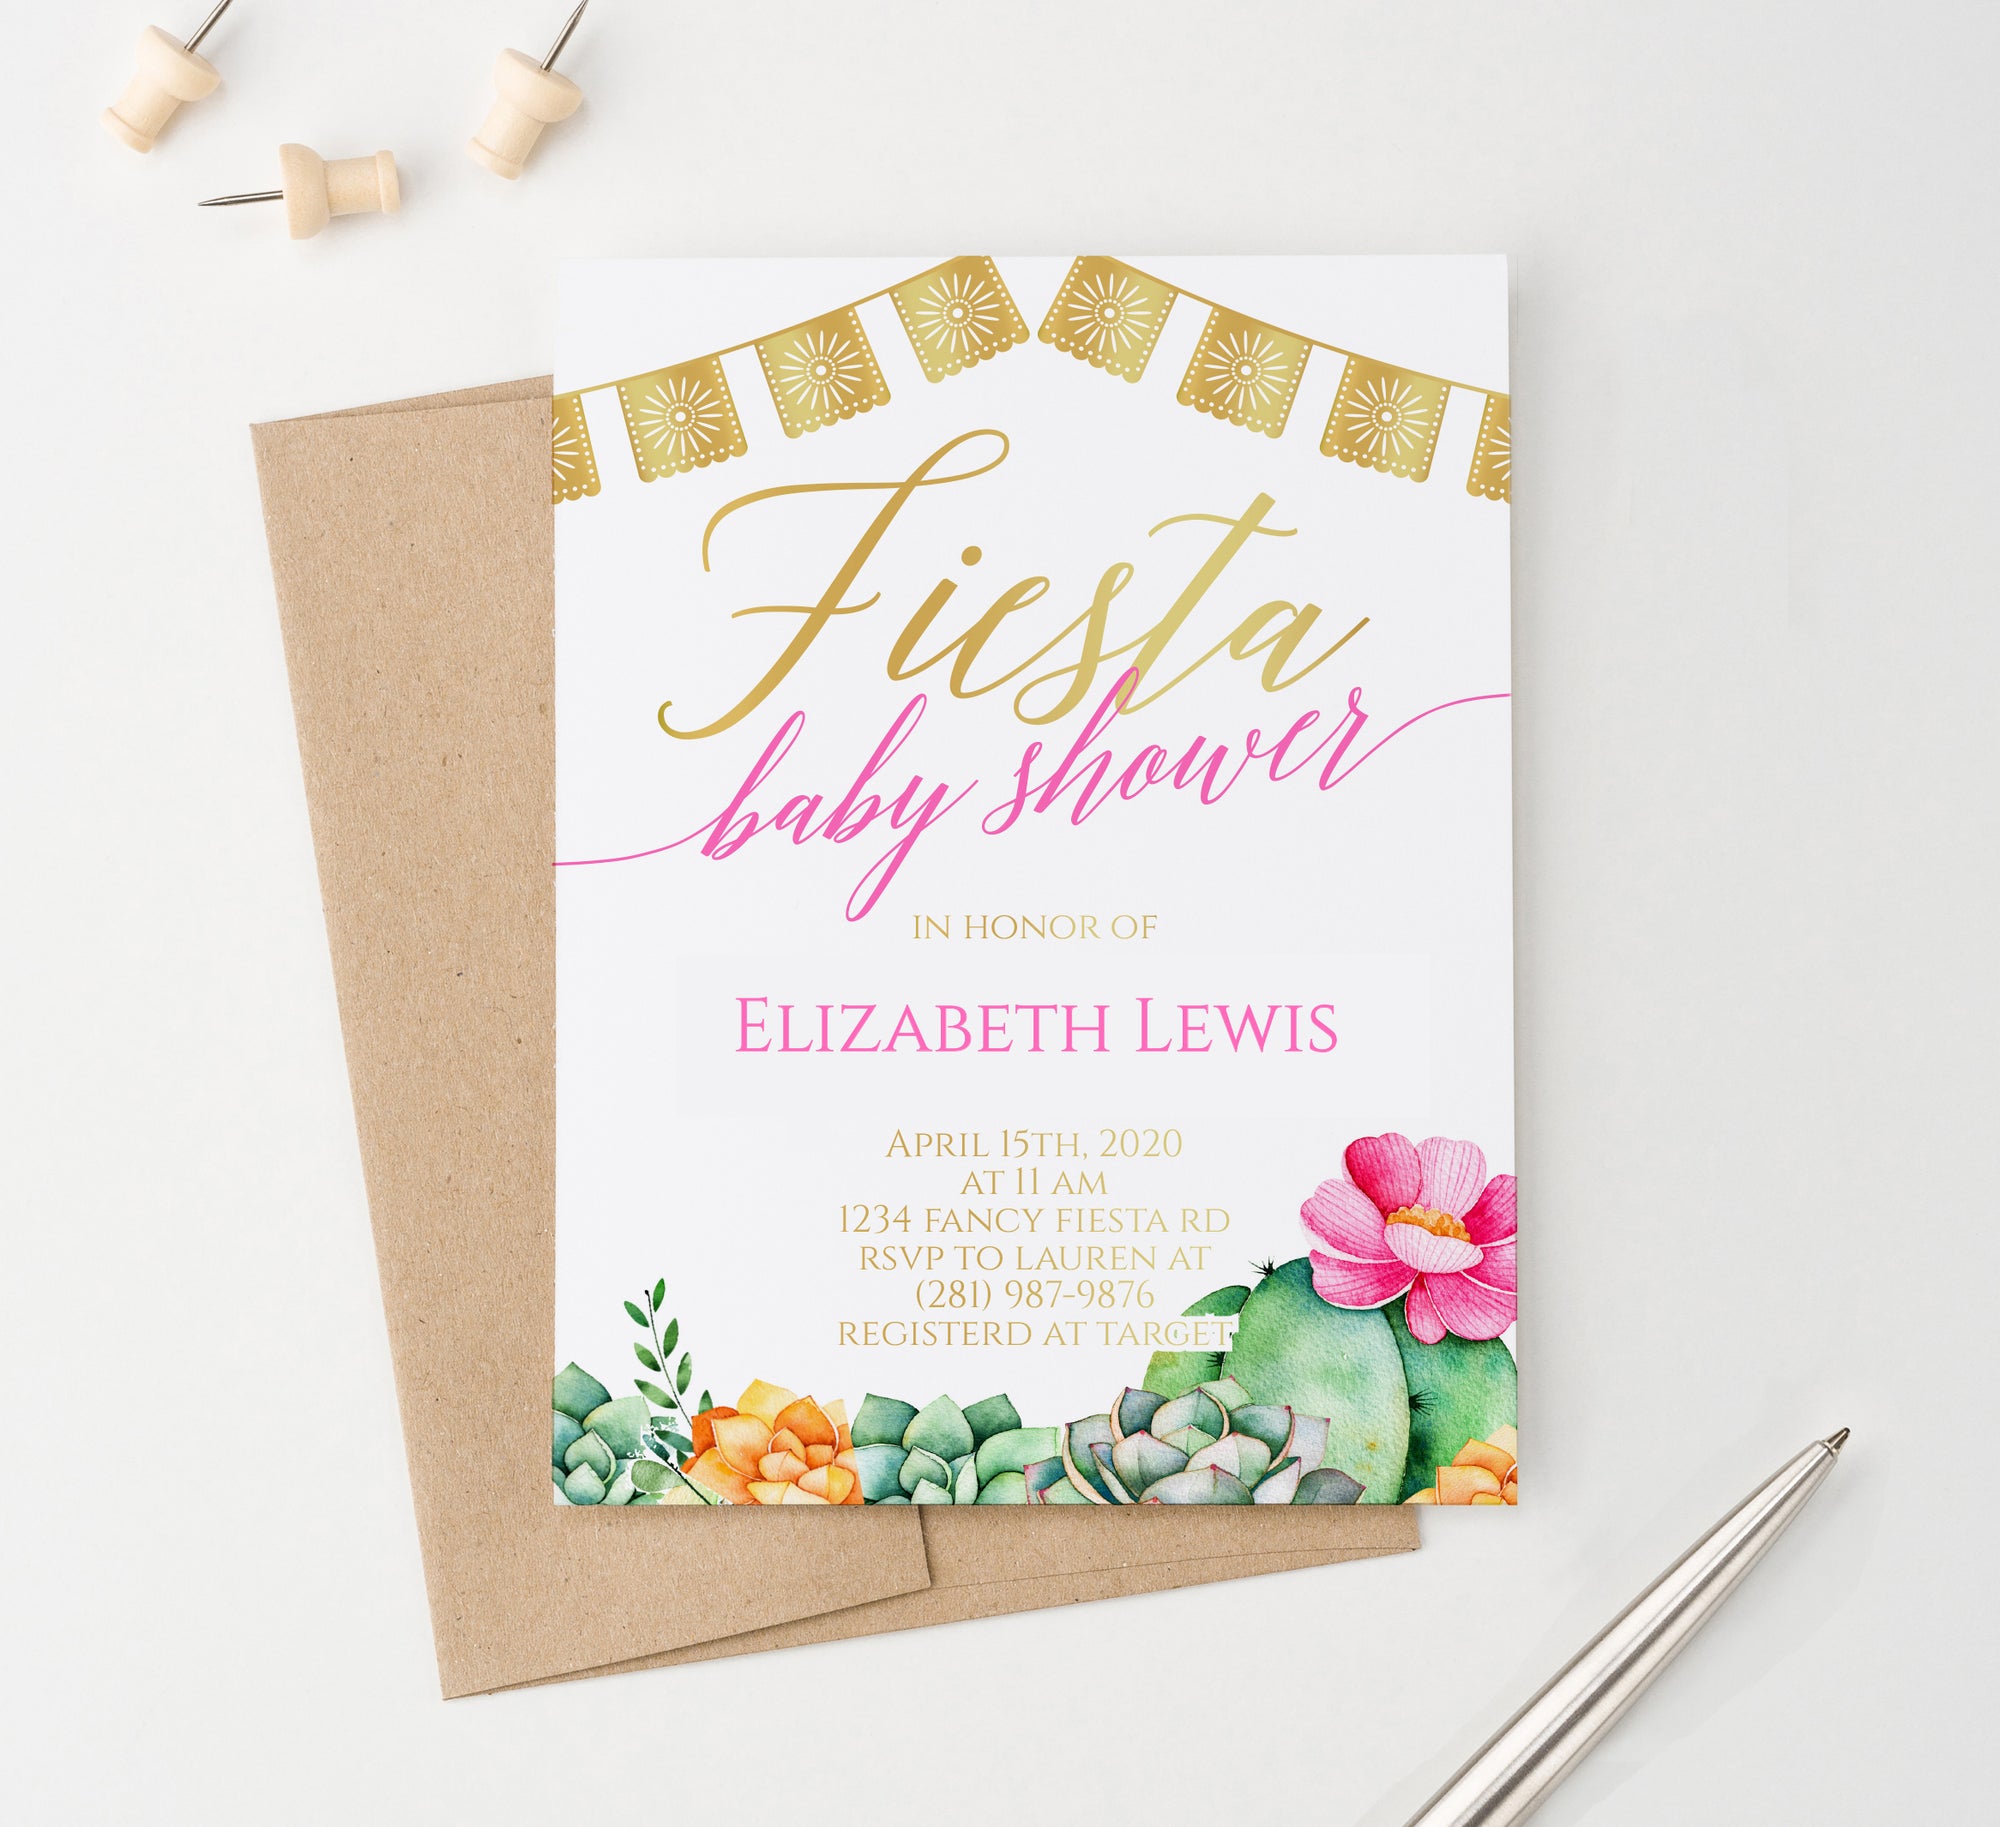 Fiesta Baby Shower Invitations With Succulents Personalized